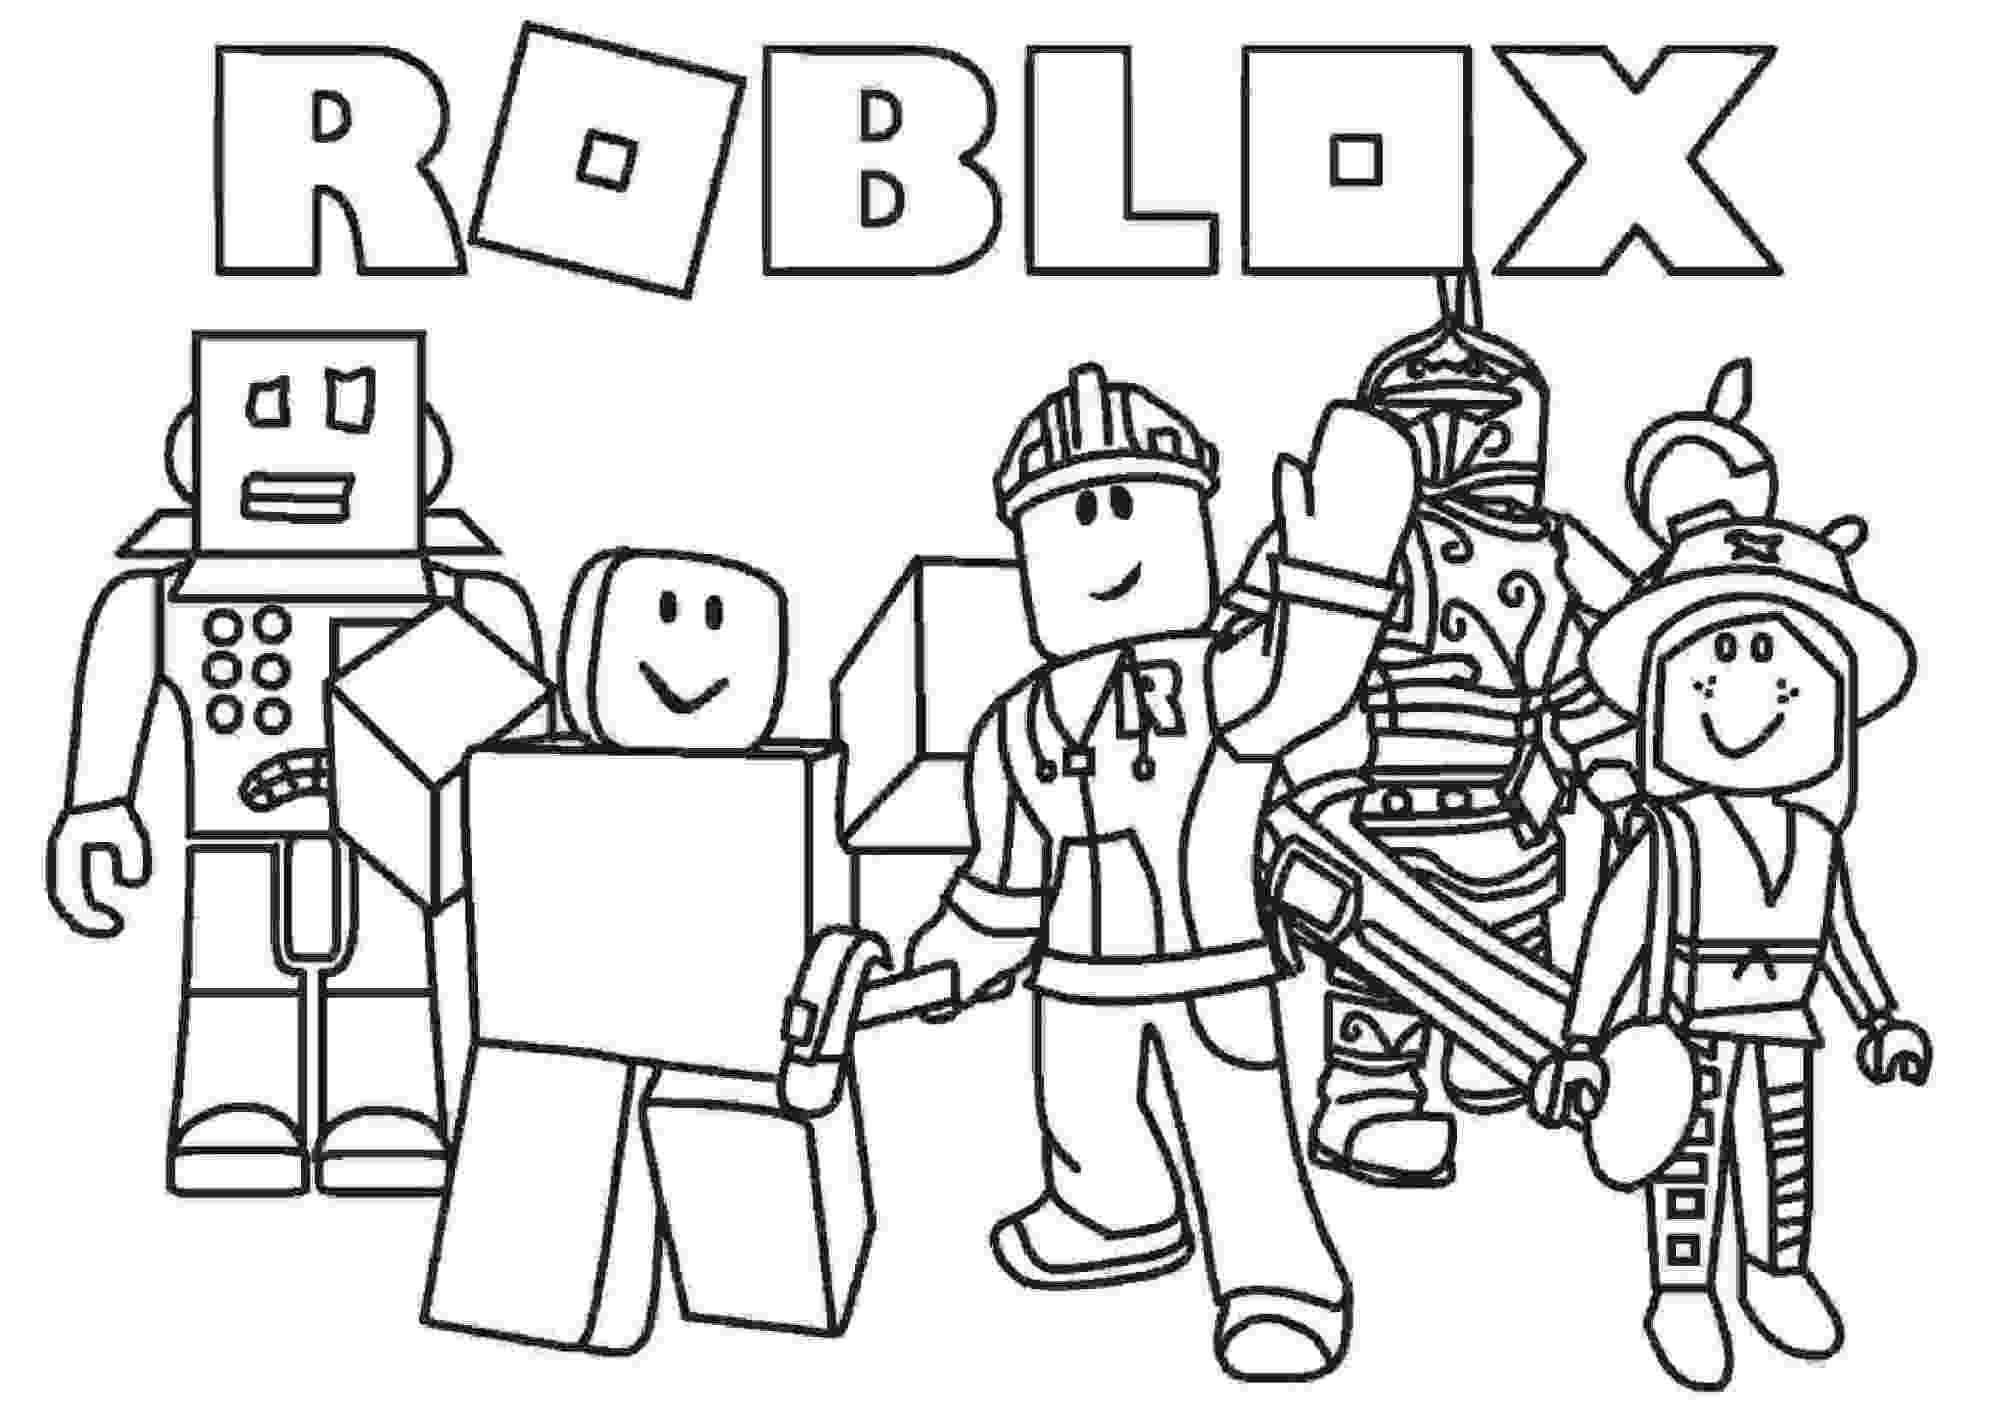 Roblox team protects the earth Coloring Page